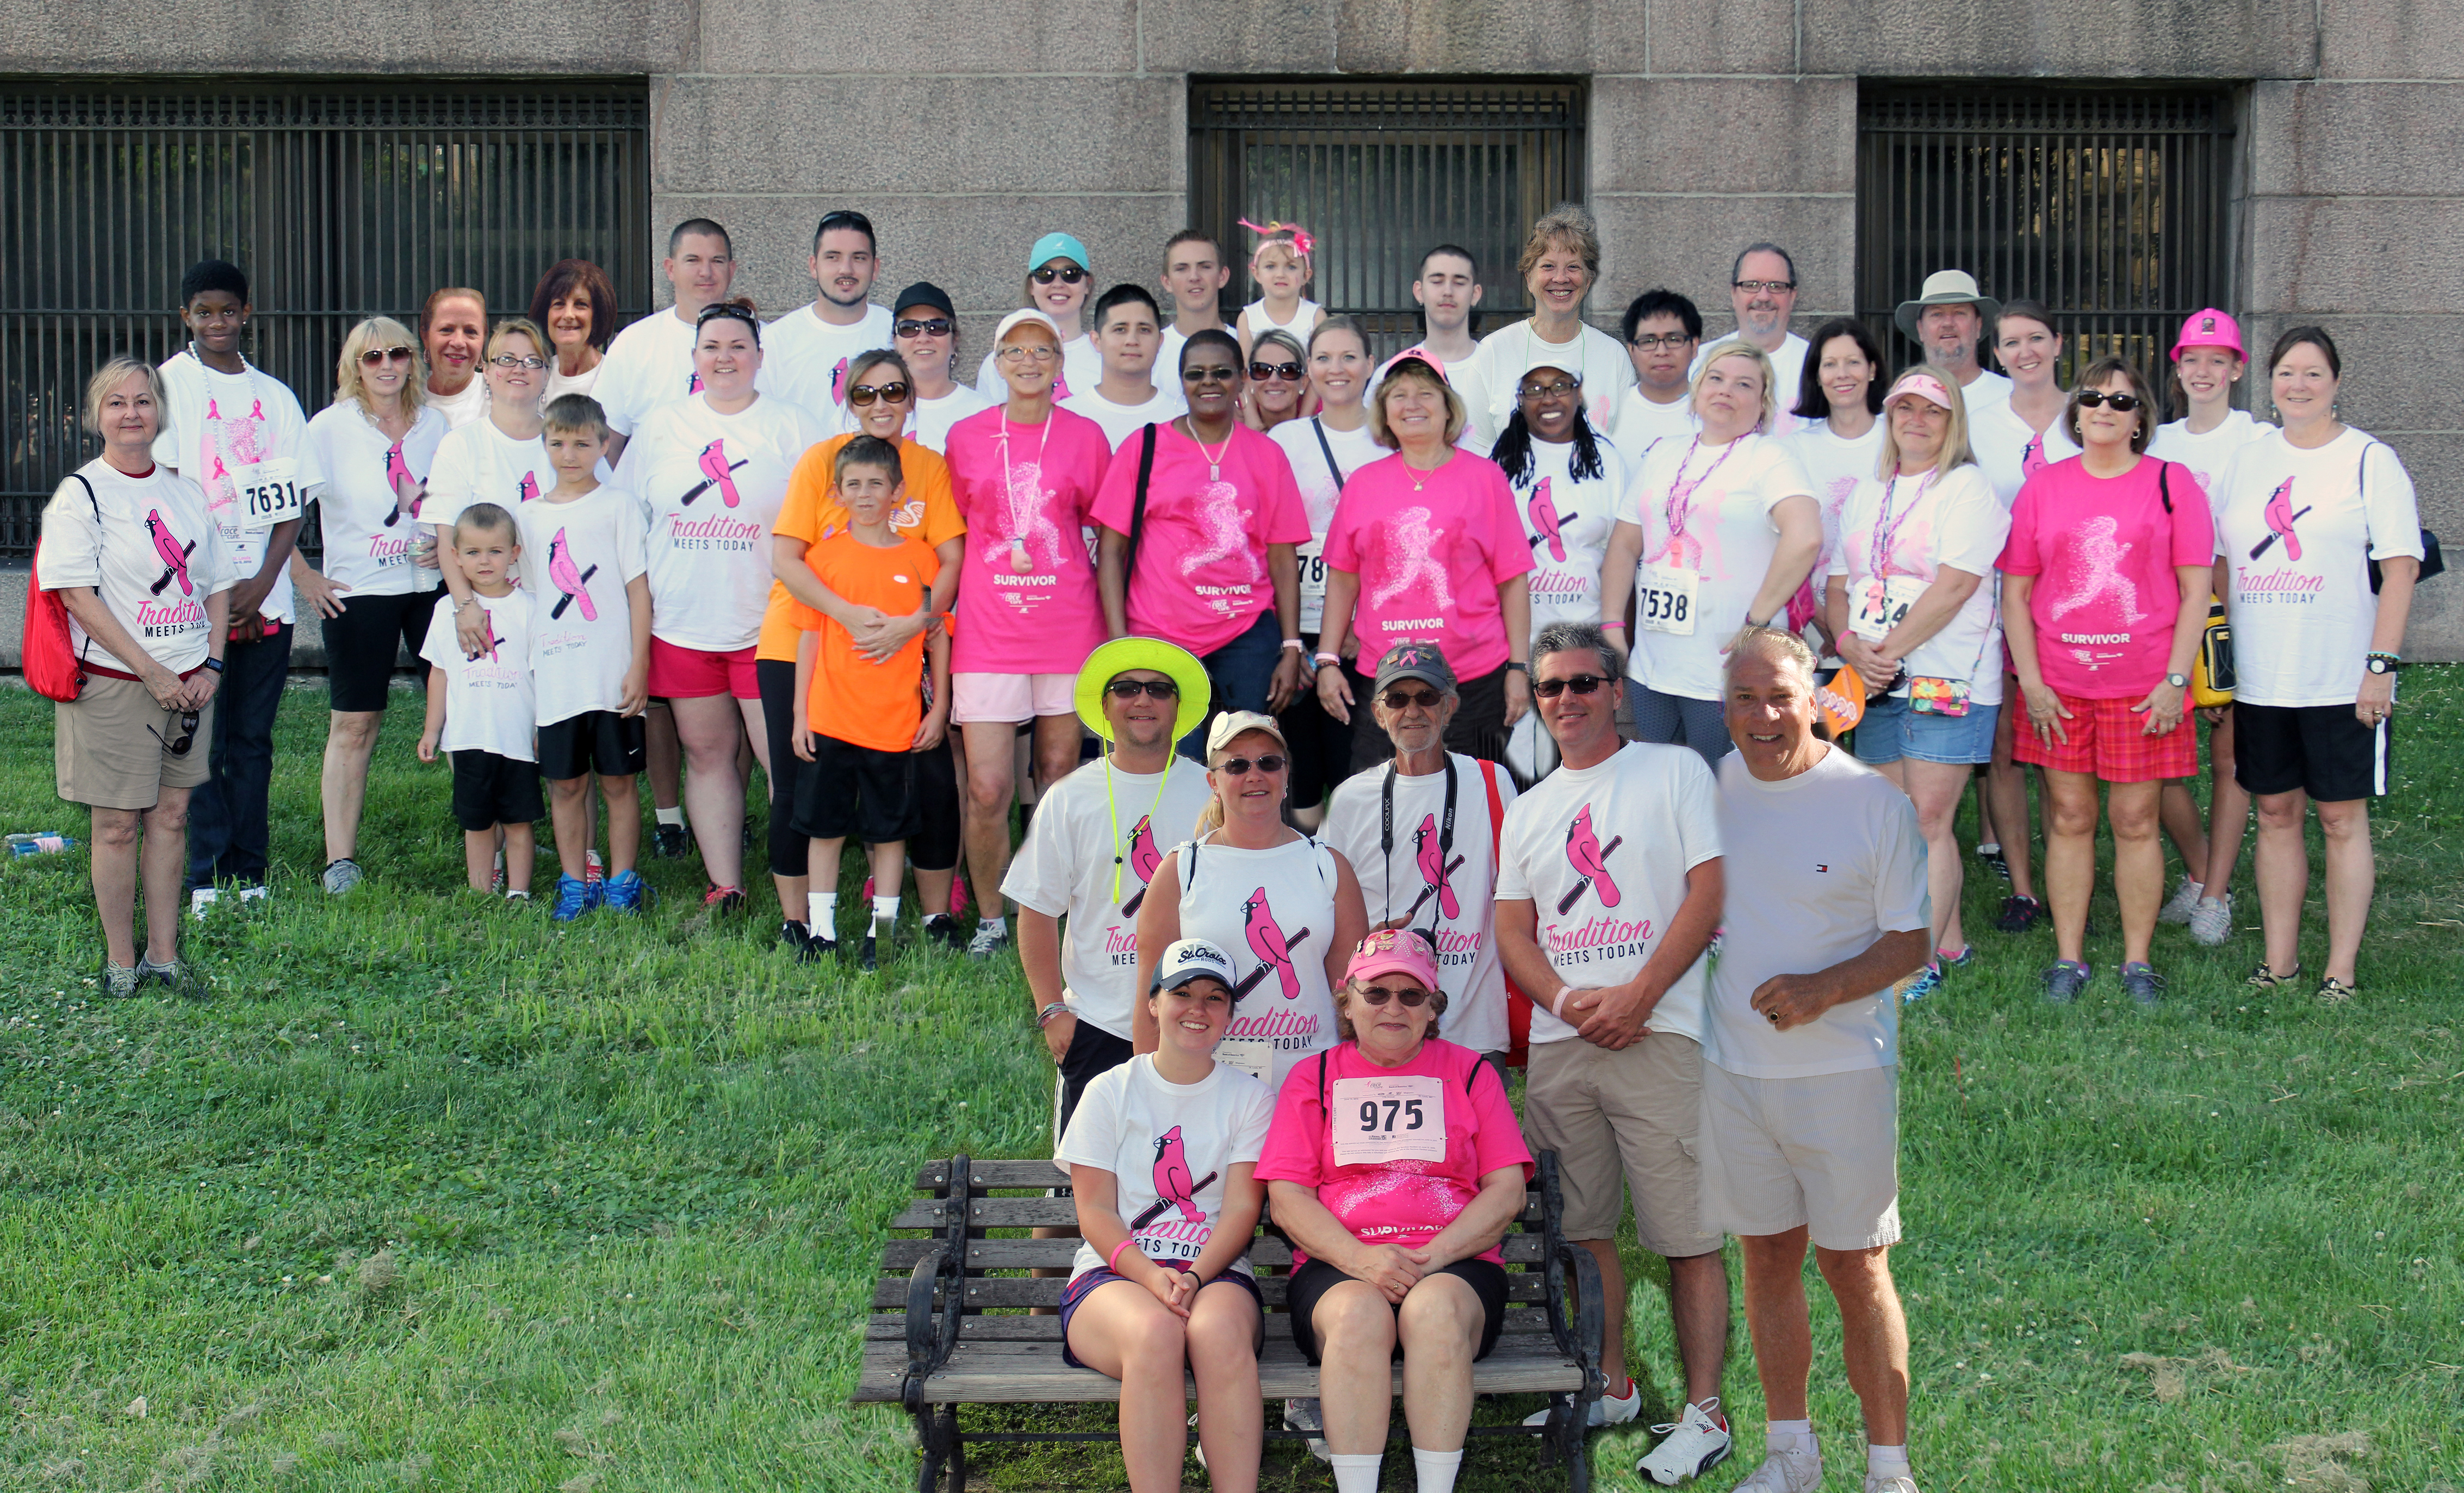 Collector of Revenue employees participate in the 2015 Susan G. Komen Race for the Cure